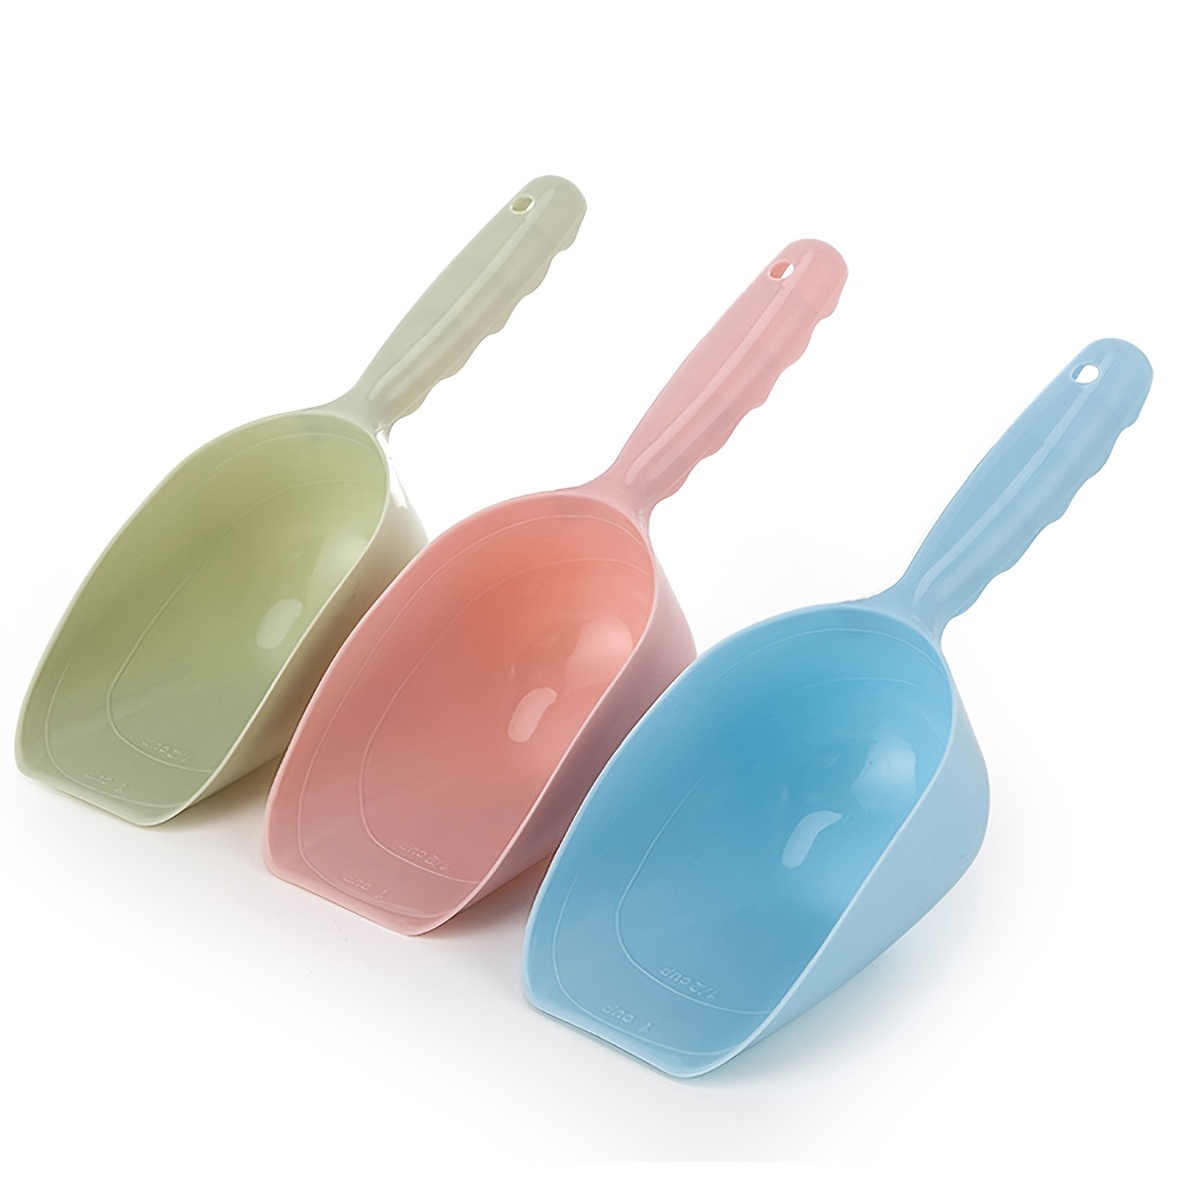 Dog Food Scoops: Best Food Serving Scoop Prices (Free Shipping